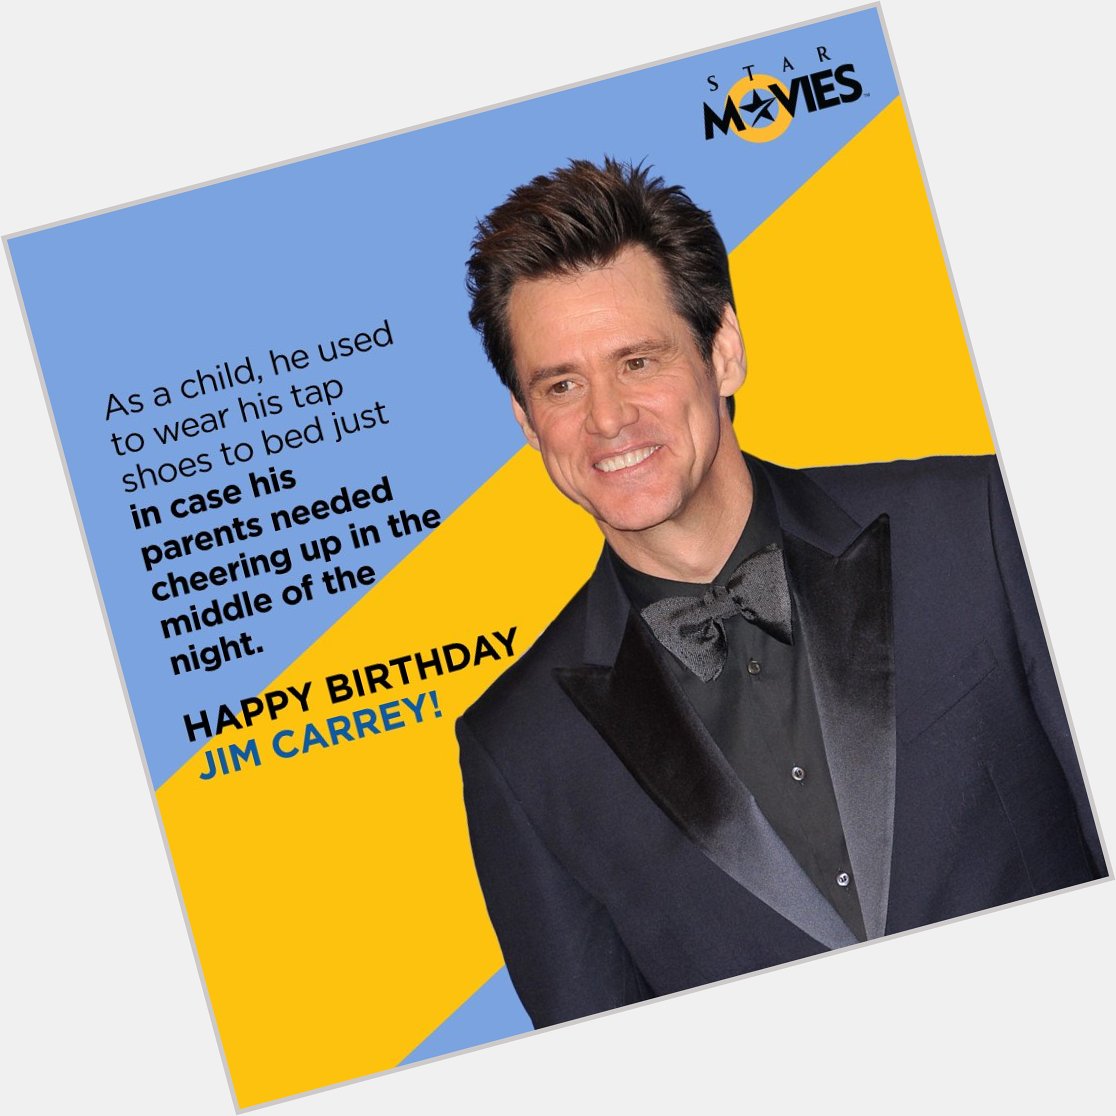 Known for his stand-up comedy and crazy grin here s wishing Jim Carrey a very happy birthday! 